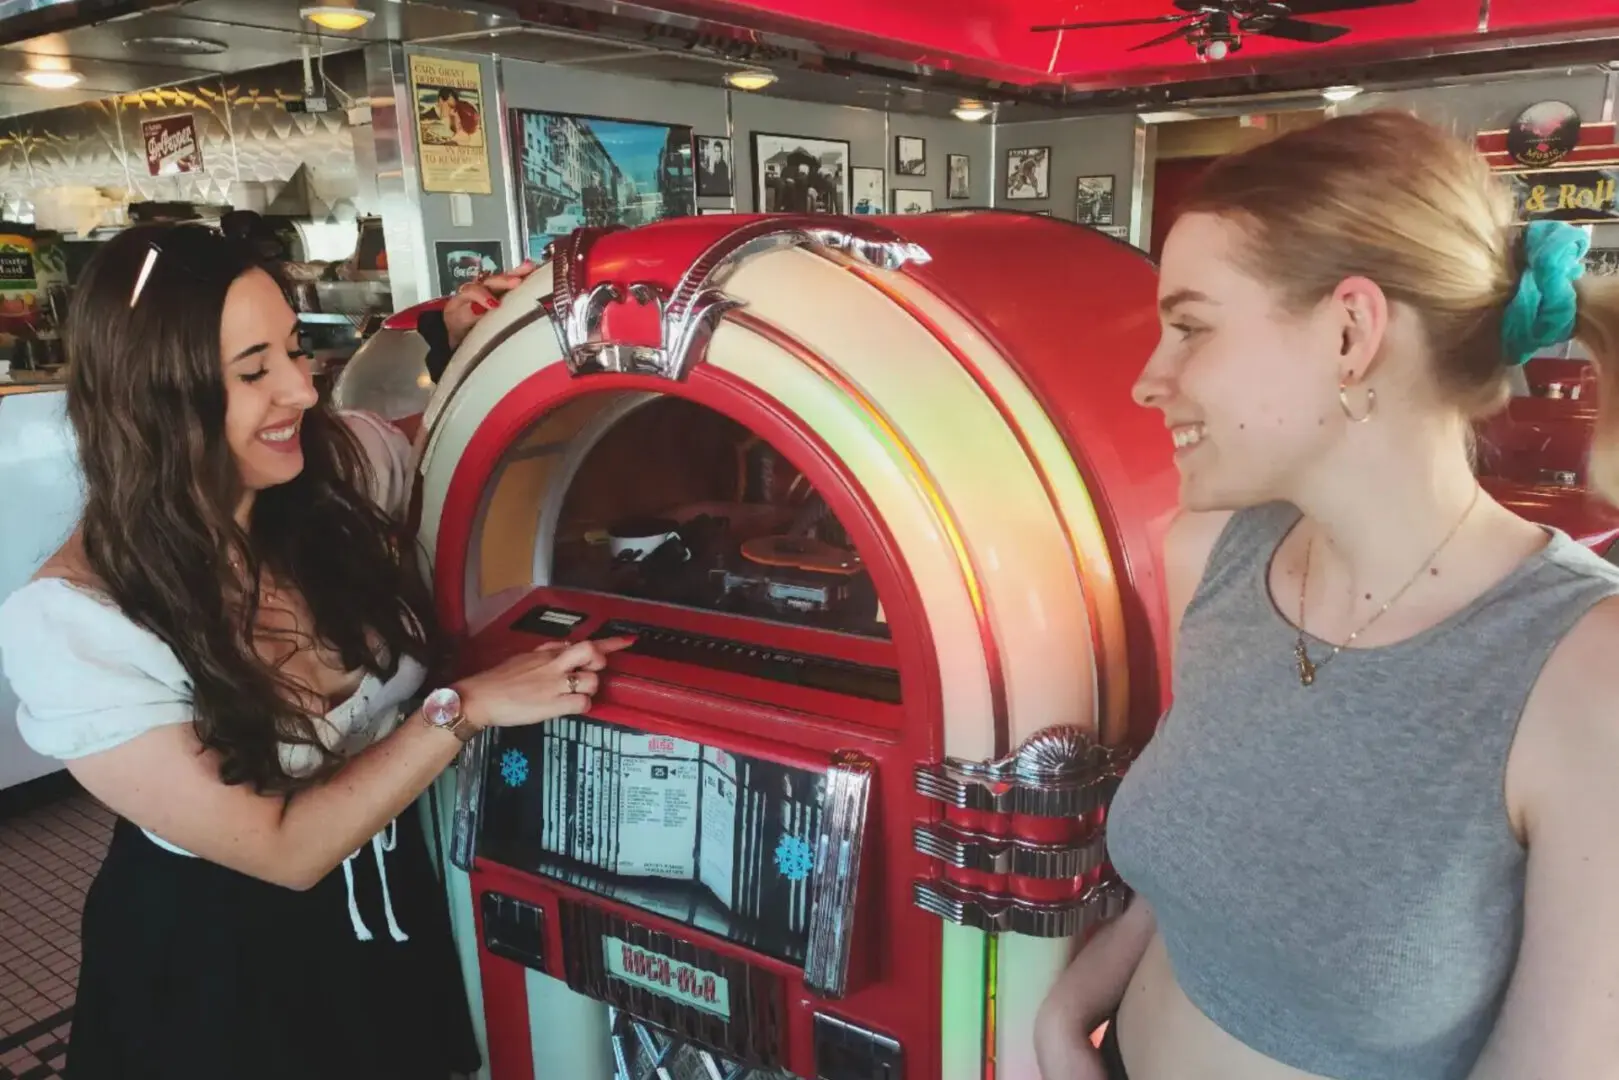 Two people are looking at a jukebox.